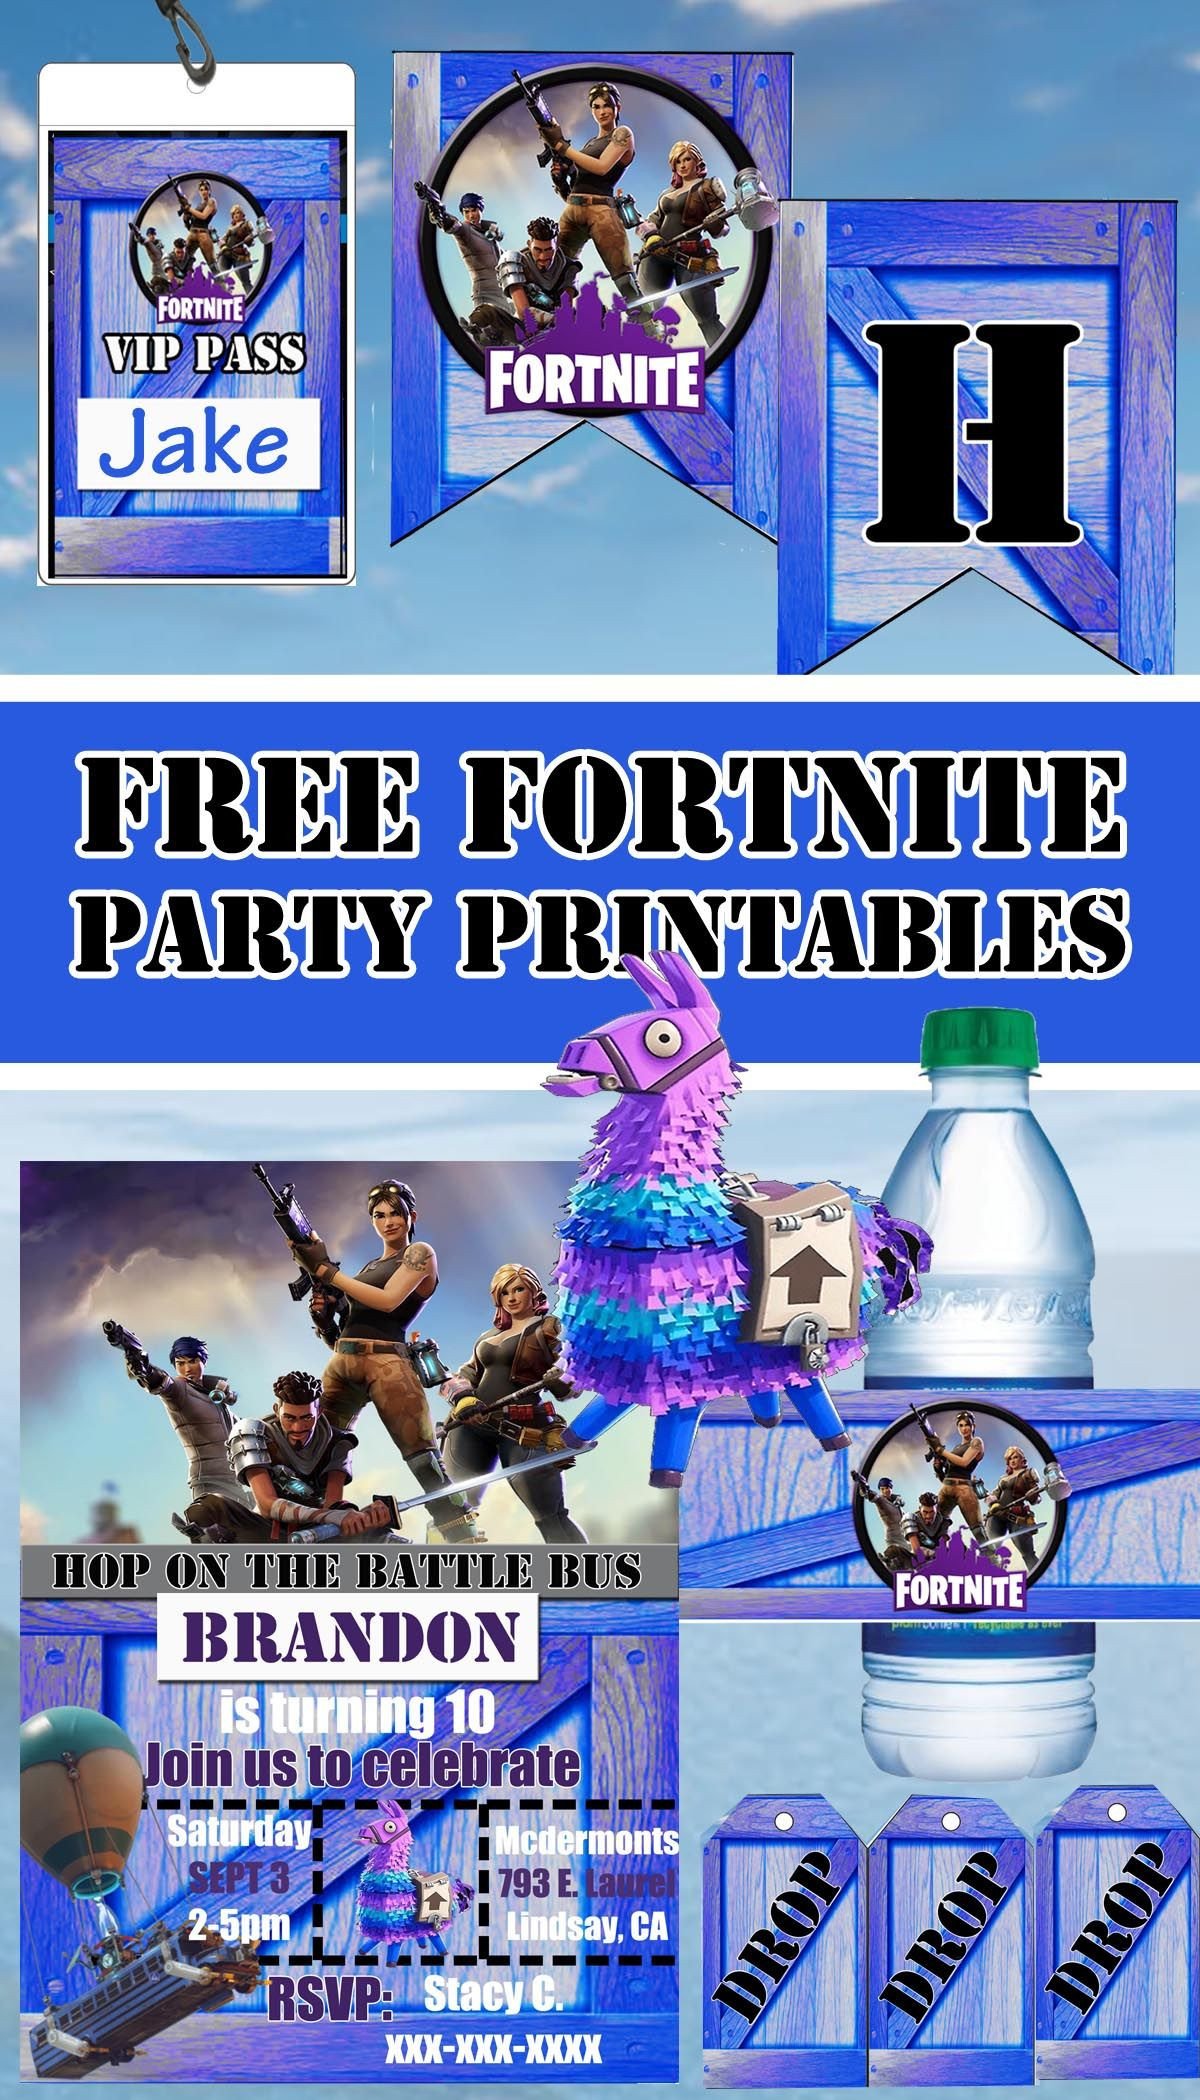 Free Birthday Party Printables Decorations
 Fortnite Birthday Party Printables